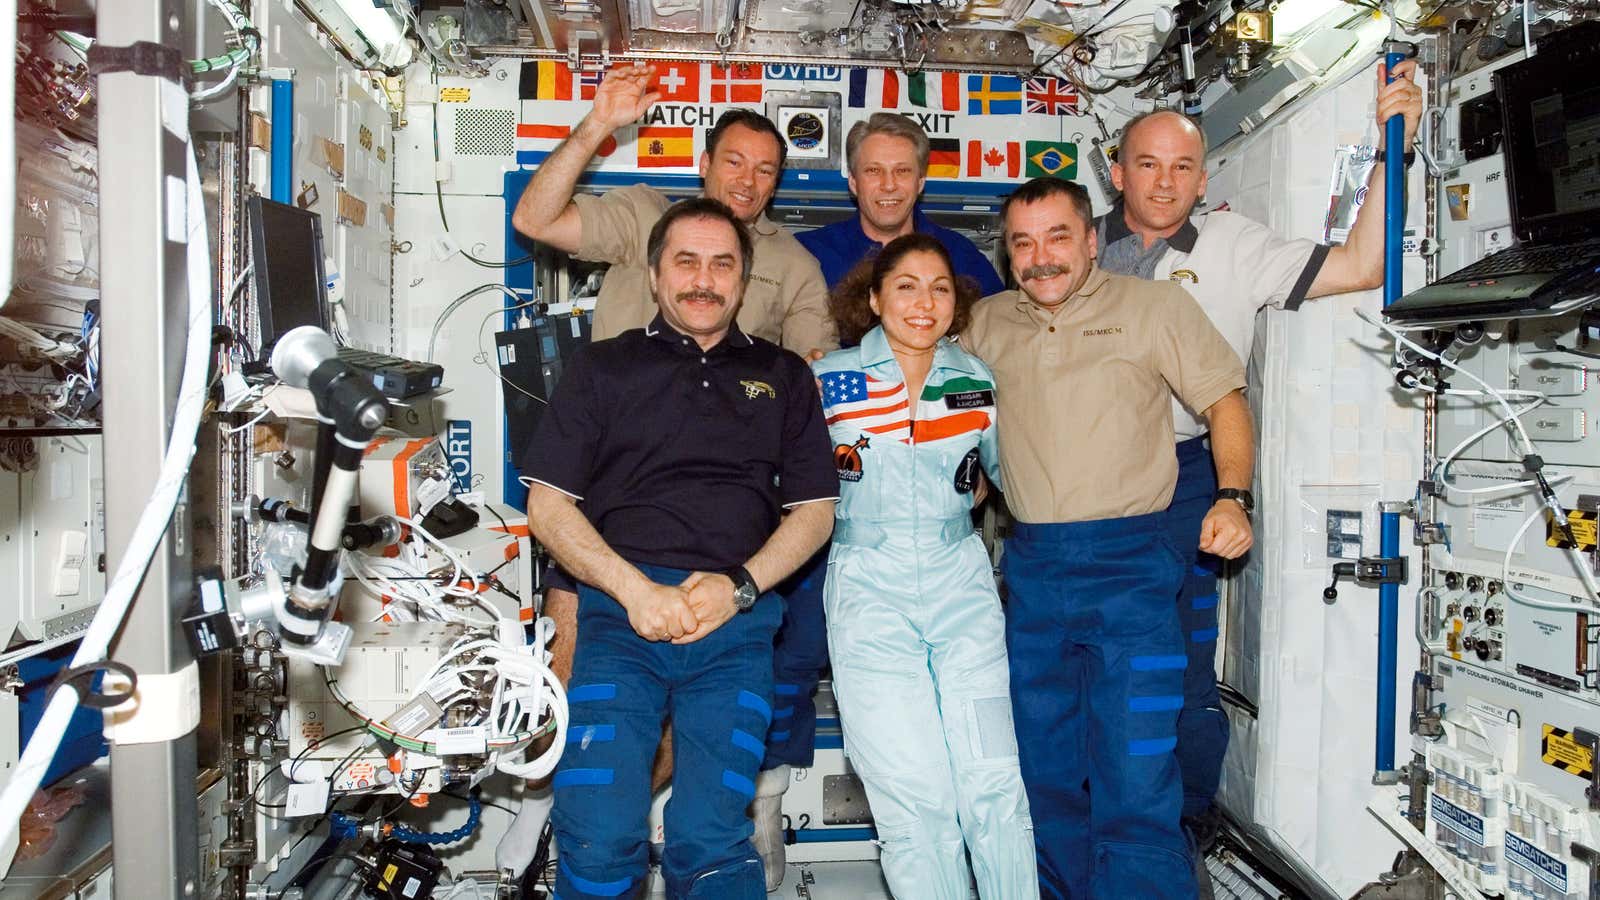 Space tourist Anousheh Ansari, center, onboard the International Space Station in 2006.